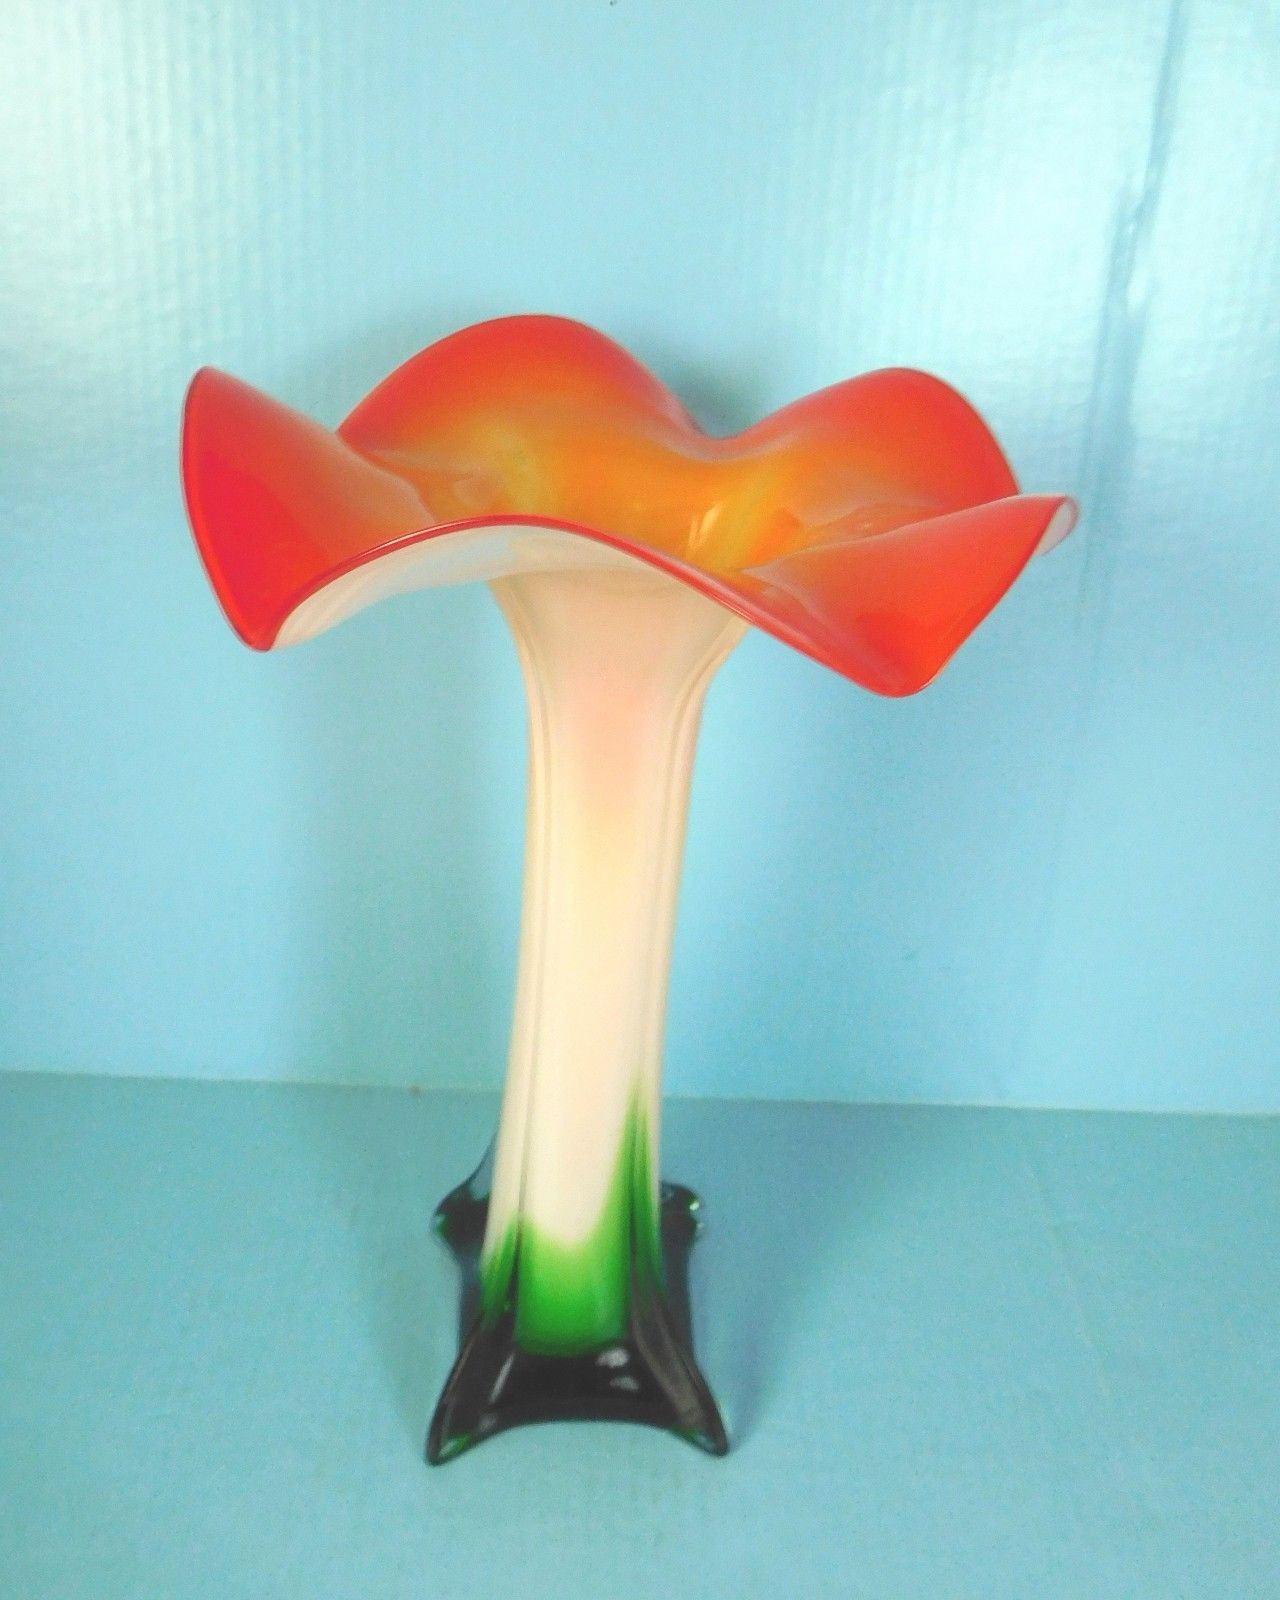 27 Elegant Sea Urchin Glass Vase 2023 free download sea urchin glass vase of flower petal retro art glass vase 14 25 tall poppy red green pertaining to 1 of 8 see more